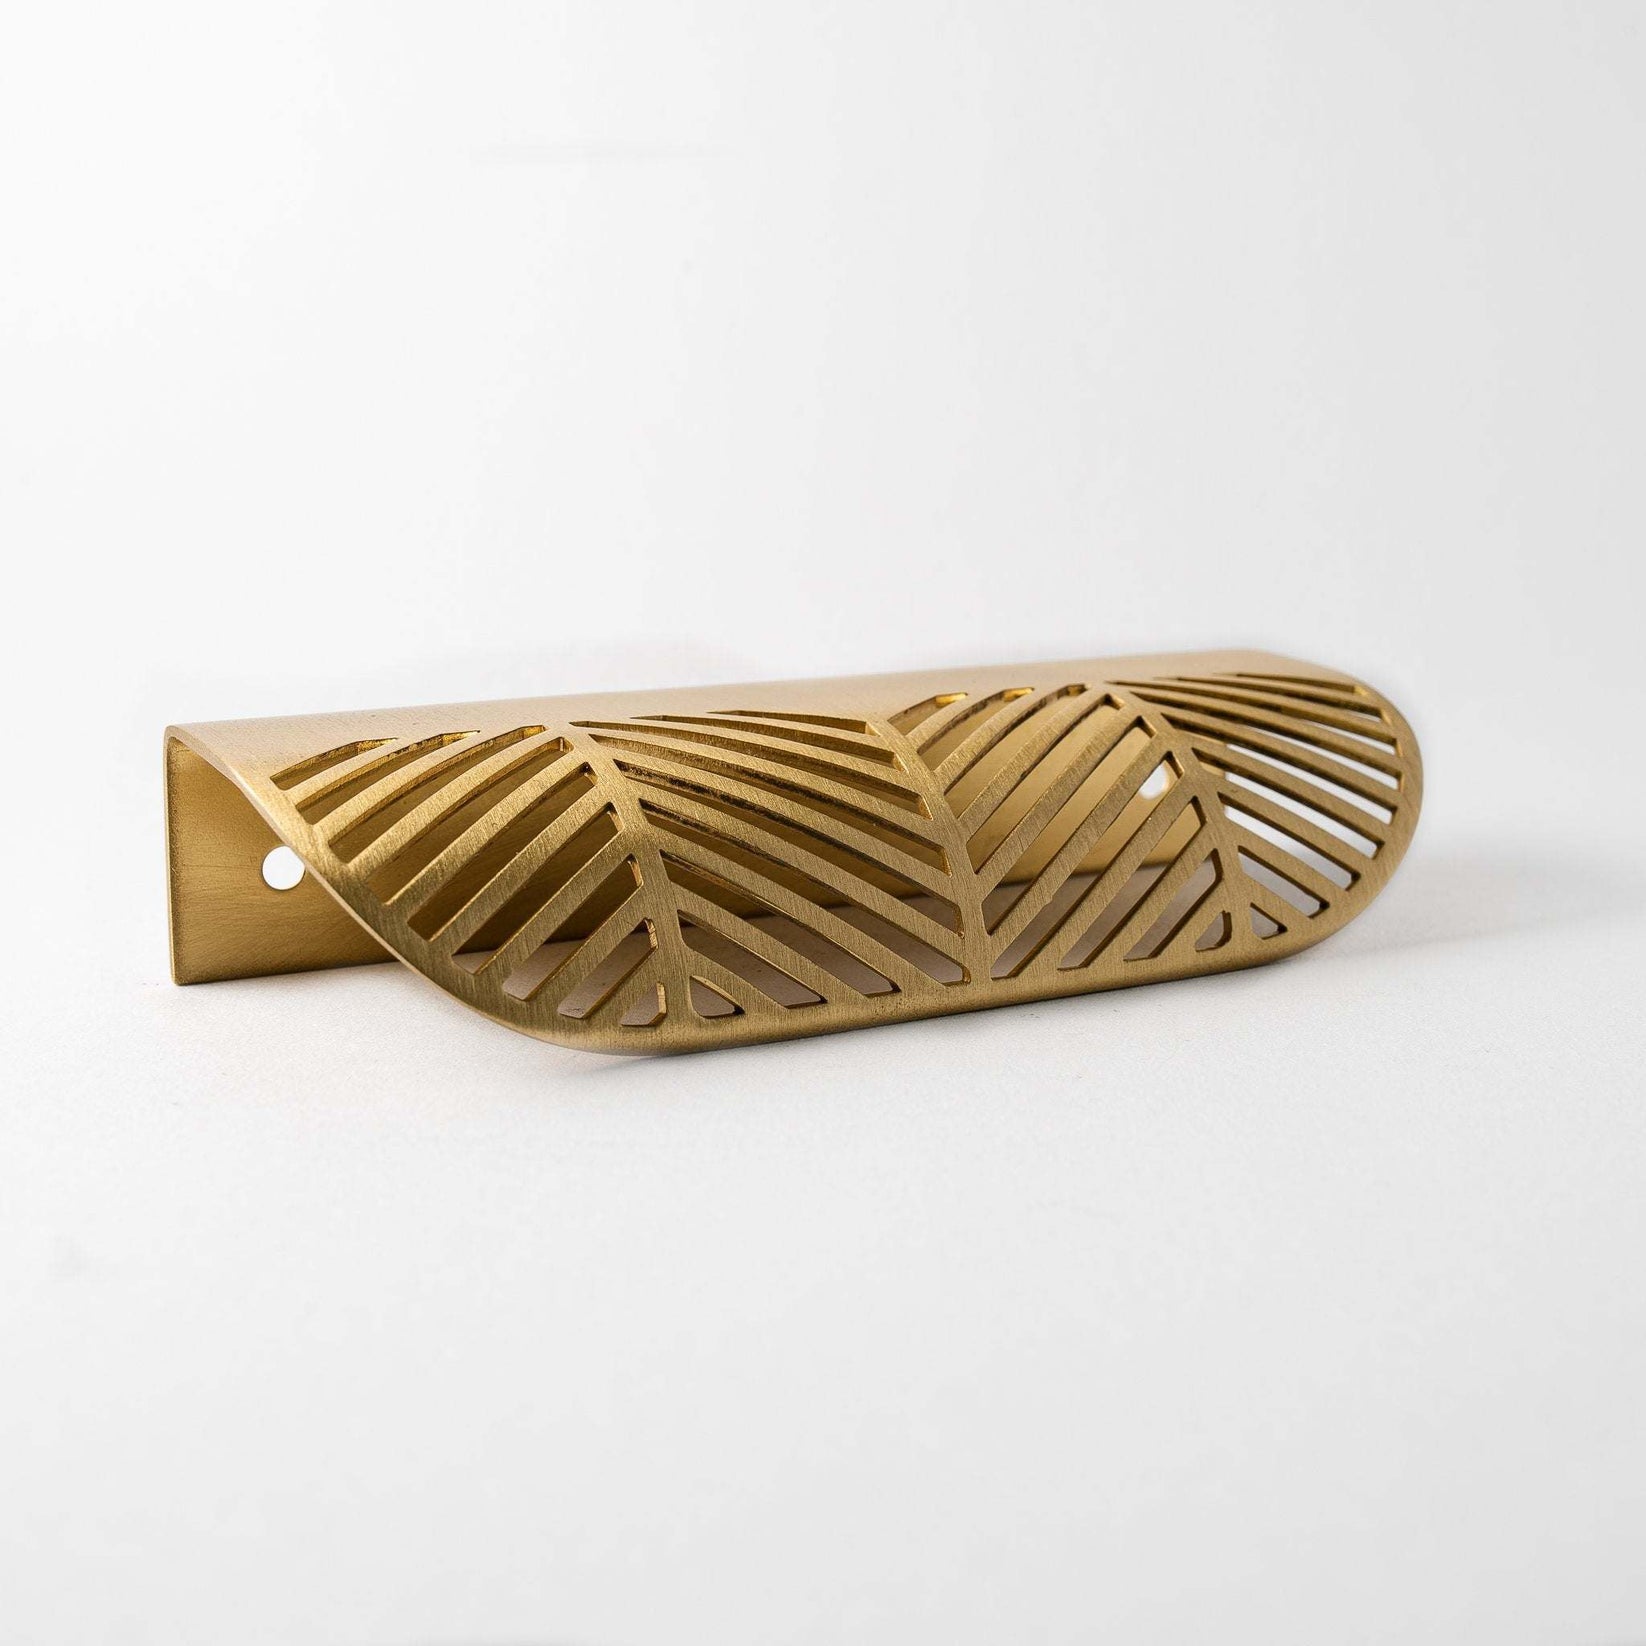 Buy the Latest Unique Brass Cabinet Pulls Online | Inspire Hardware